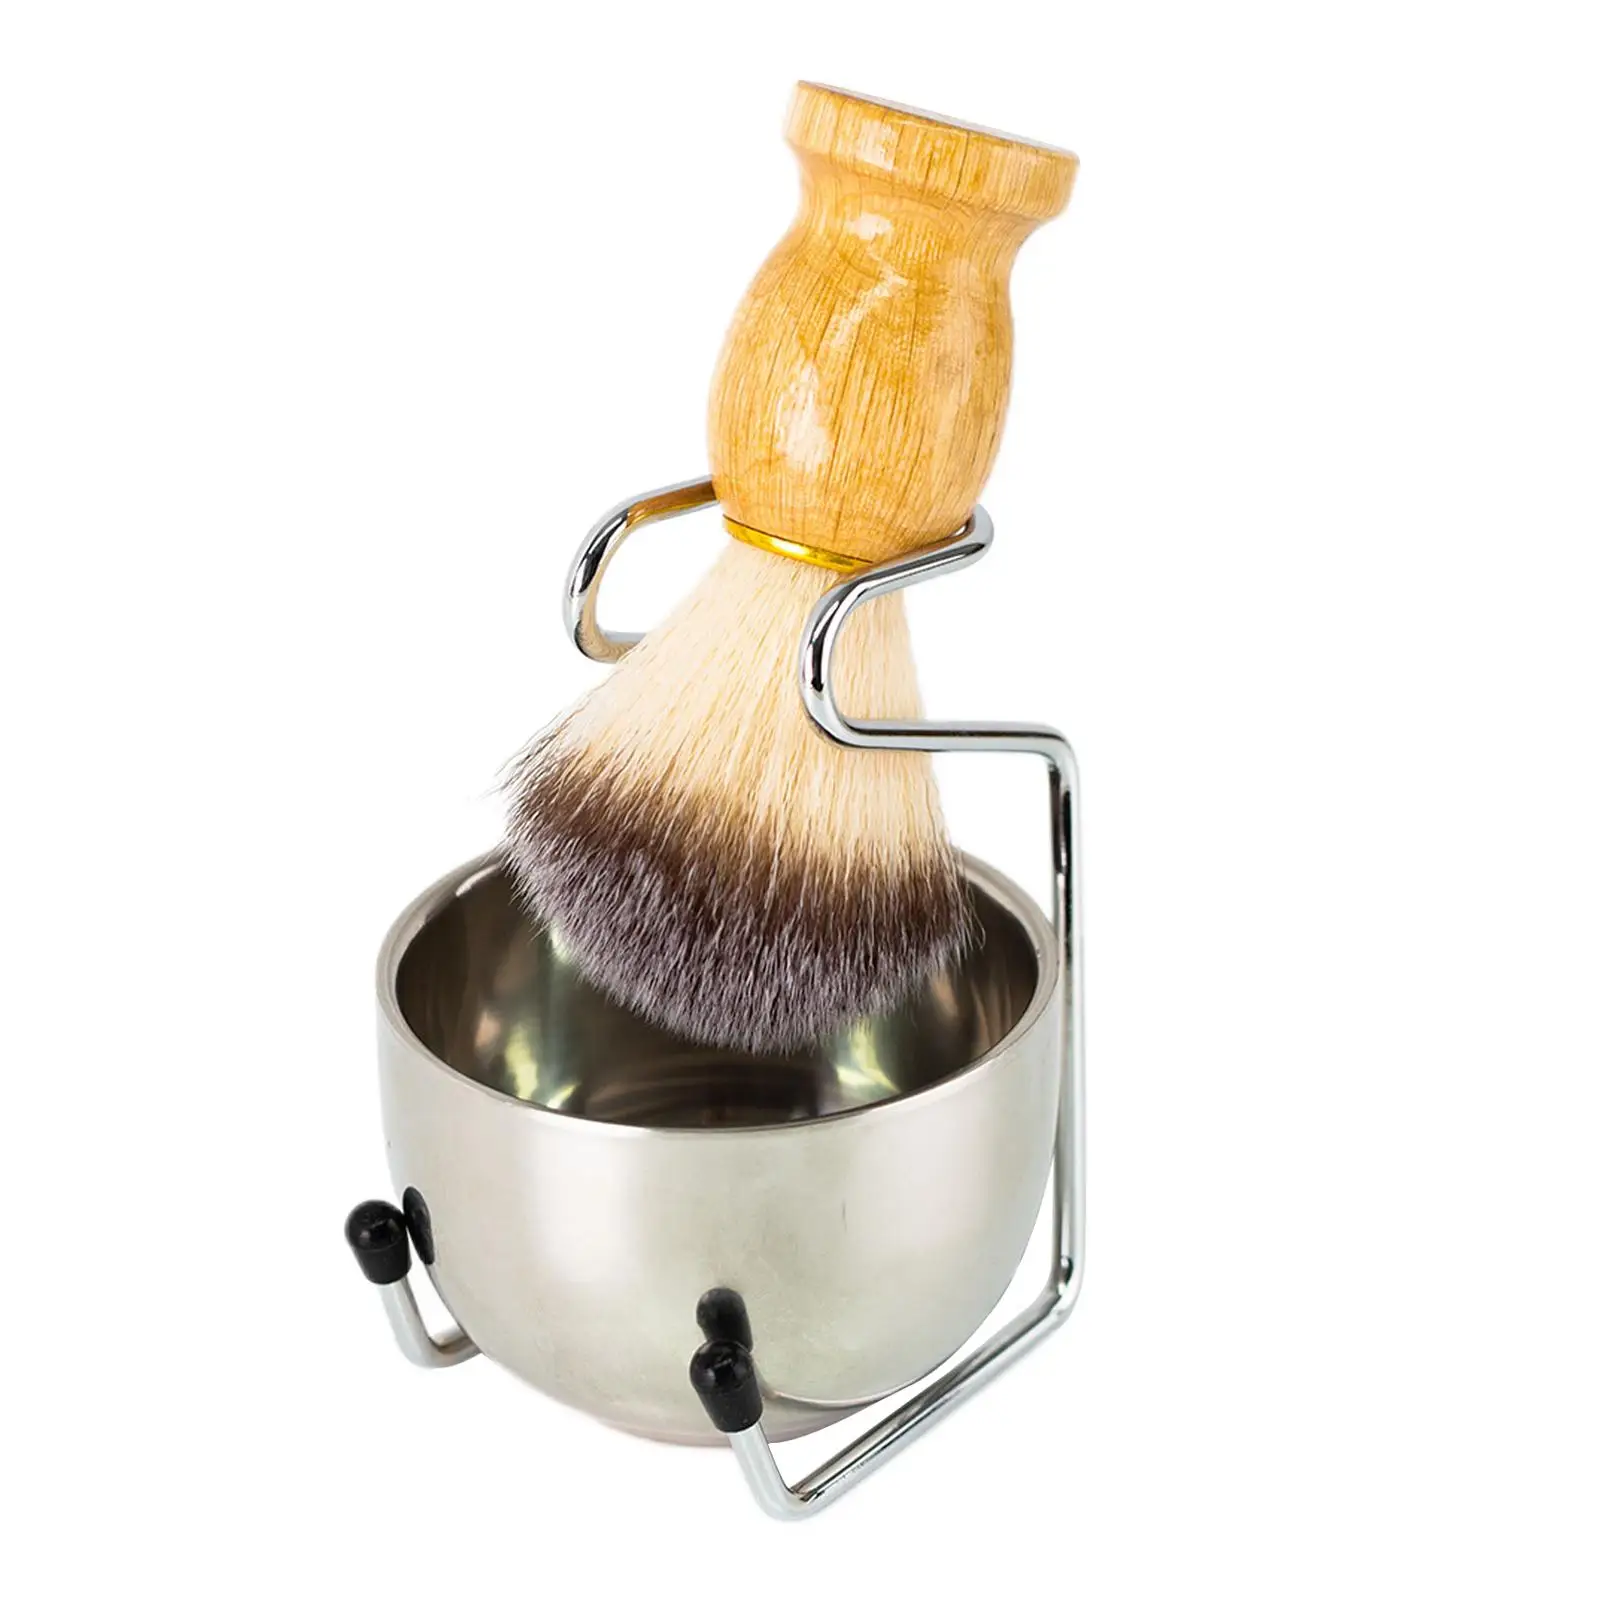 Wet Shaving with Shave Brush Stand Mug Solid Wood Handle Gift Convenient